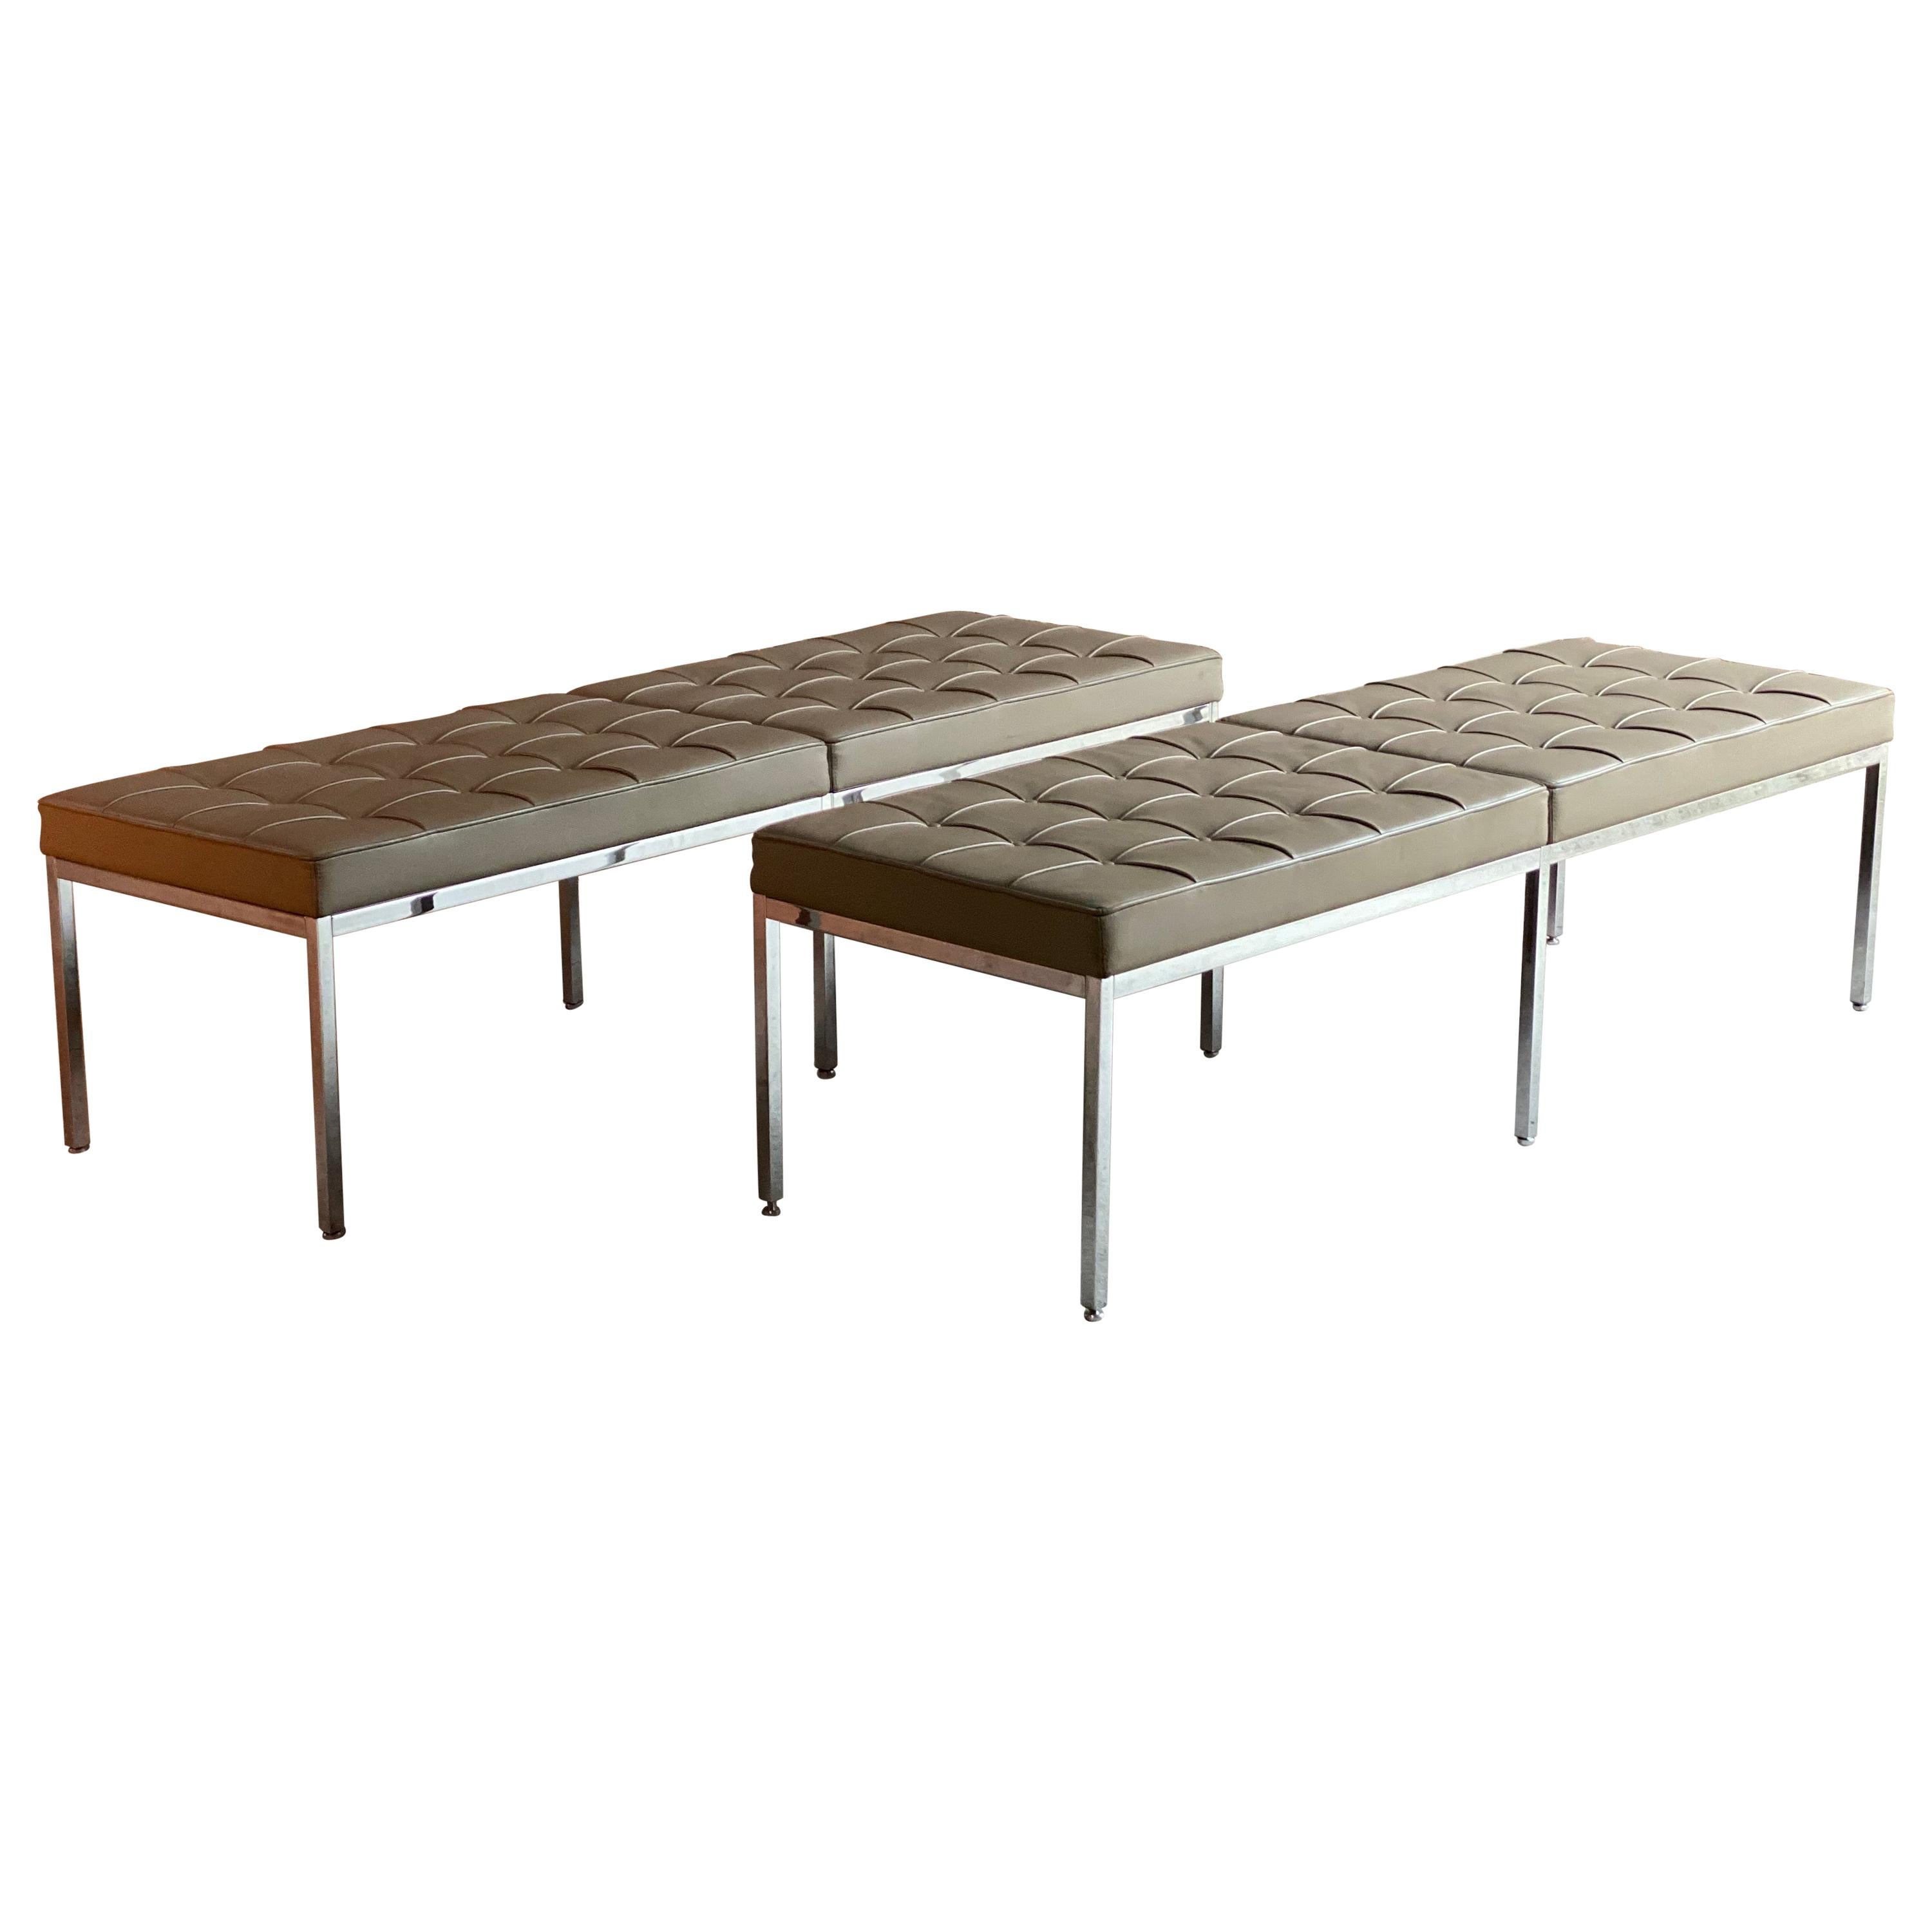 Florence Knoll three-seat leather benches by Knoll Studio, stamped & signed

Fabulous pair of Florence Knoll three-seat benches by Knoll studio finished in color parchment in Volo leather on a chrome base, stamped Florence Knoll, Knoll Studio,